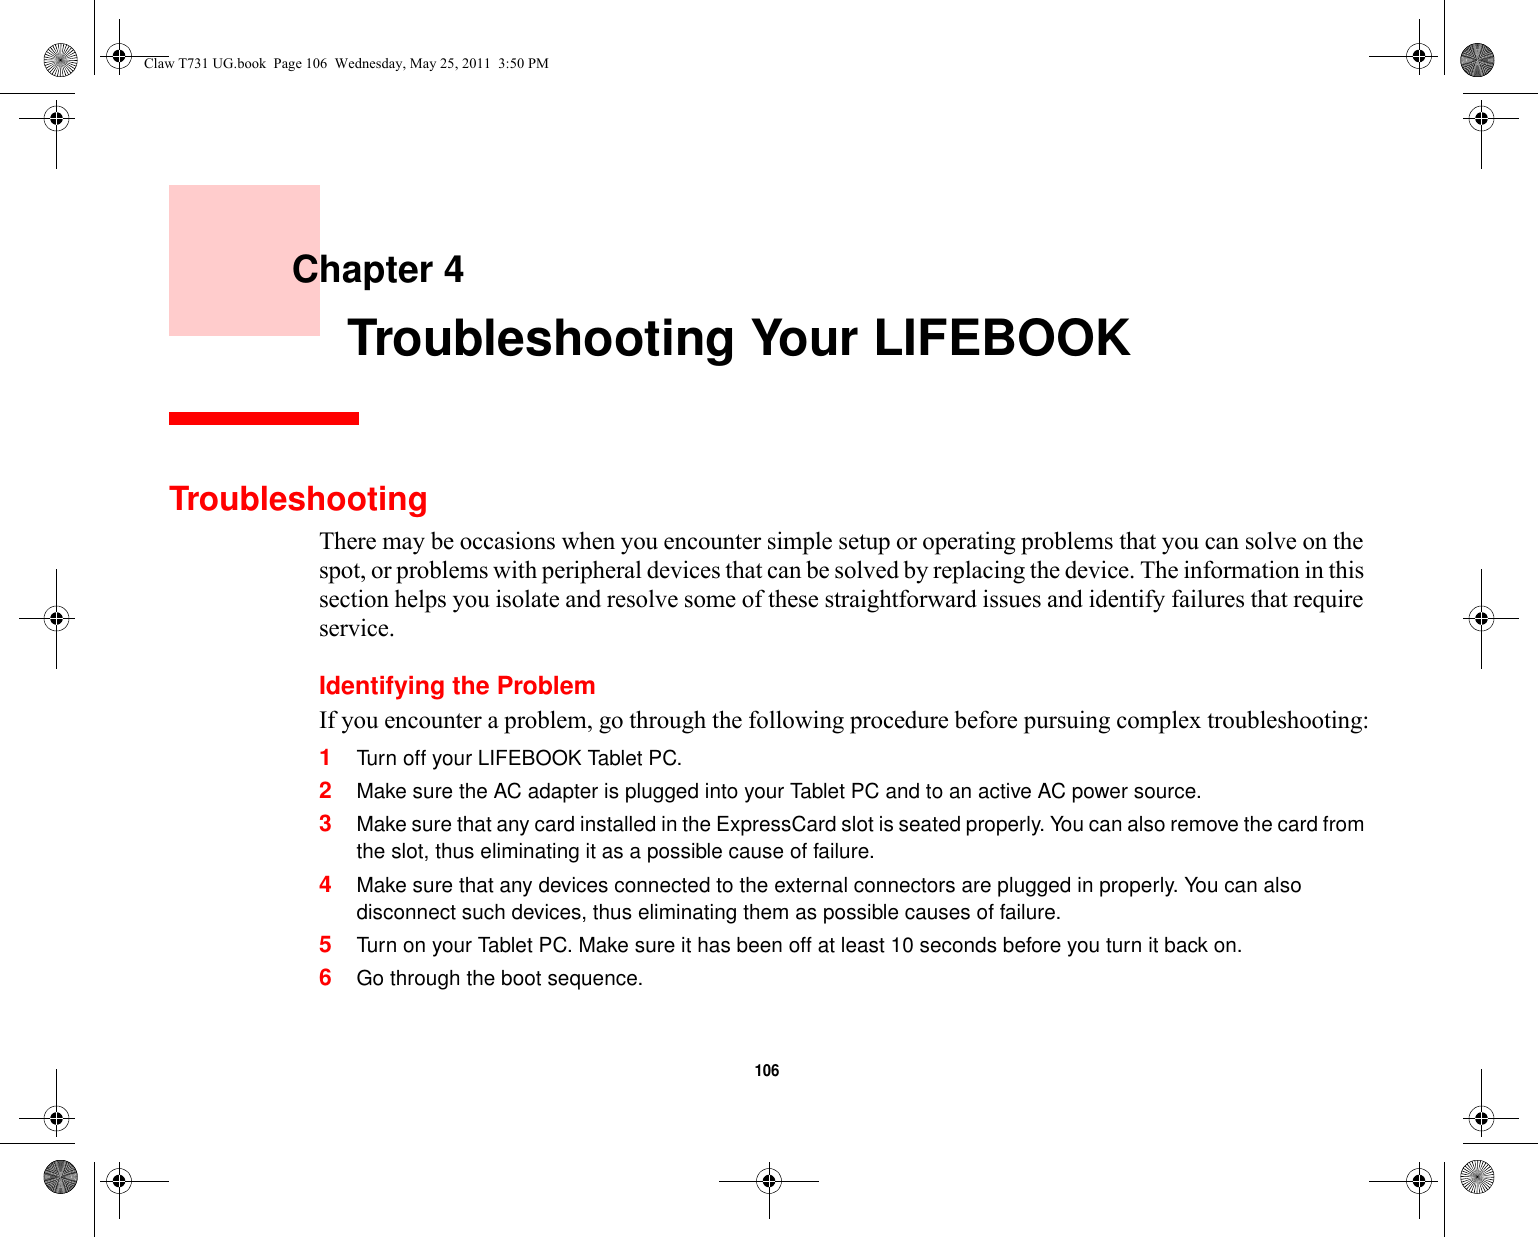 106     Chapter 4    Troubleshooting Your LIFEBOOKTroubleshootingThere may be occasions when you encounter simple setup or operating problems that you can solve on the spot, or problems with peripheral devices that can be solved by replacing the device. The information in this section helps you isolate and resolve some of these straightforward issues and identify failures that require service.Identifying the ProblemIf you encounter a problem, go through the following procedure before pursuing complex troubleshooting:1Turn off your LIFEBOOK Tablet PC.2Make sure the AC adapter is plugged into your Tablet PC and to an active AC power source.3Make sure that any card installed in the ExpressCard slot is seated properly. You can also remove the card from the slot, thus eliminating it as a possible cause of failure.4Make sure that any devices connected to the external connectors are plugged in properly. You can also disconnect such devices, thus eliminating them as possible causes of failure.5Turn on your Tablet PC. Make sure it has been off at least 10 seconds before you turn it back on.6Go through the boot sequence.Claw T731 UG.book  Page 106  Wednesday, May 25, 2011  3:50 PM